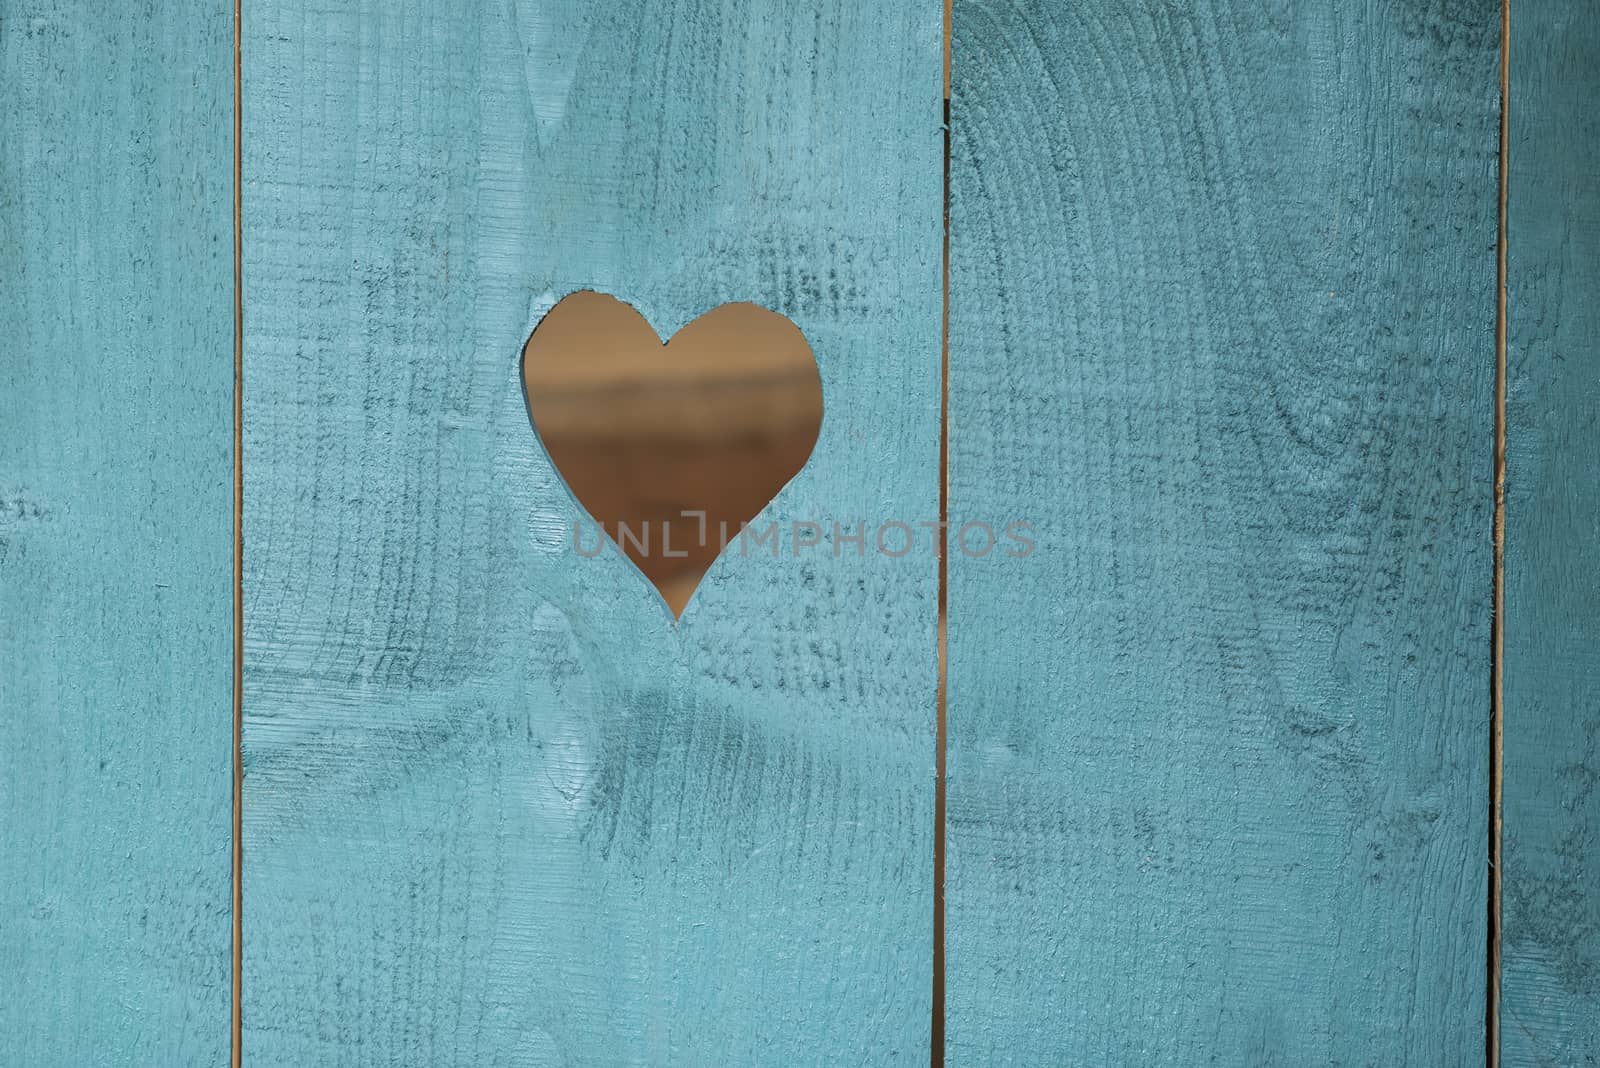 Sawn out heart in a blue background of rough wooden shelves
